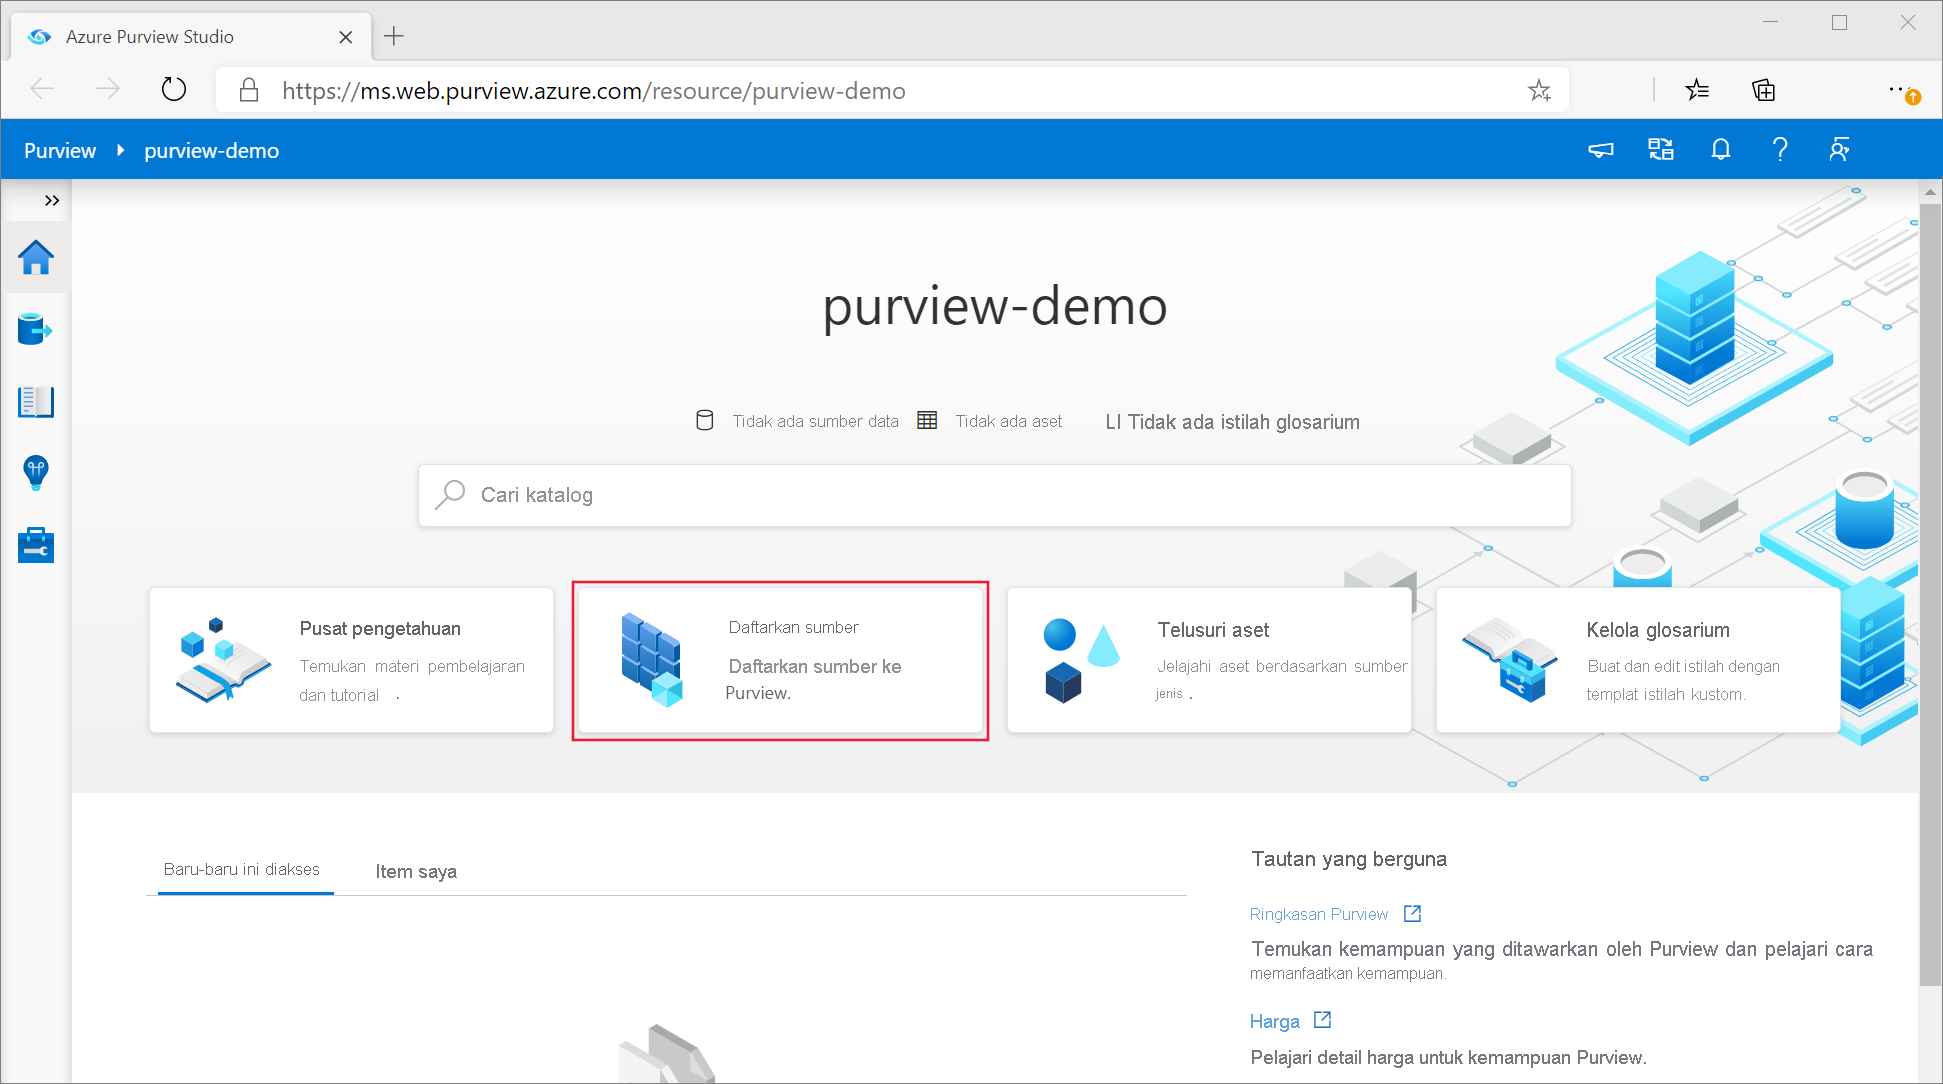 Screenshot that shows the Microsoft Purview governance portal. The portal includes the name of the Microsoft Purview account along with options to select, including Knowledge center, Register sources, Browse assets, and Manage glossary.